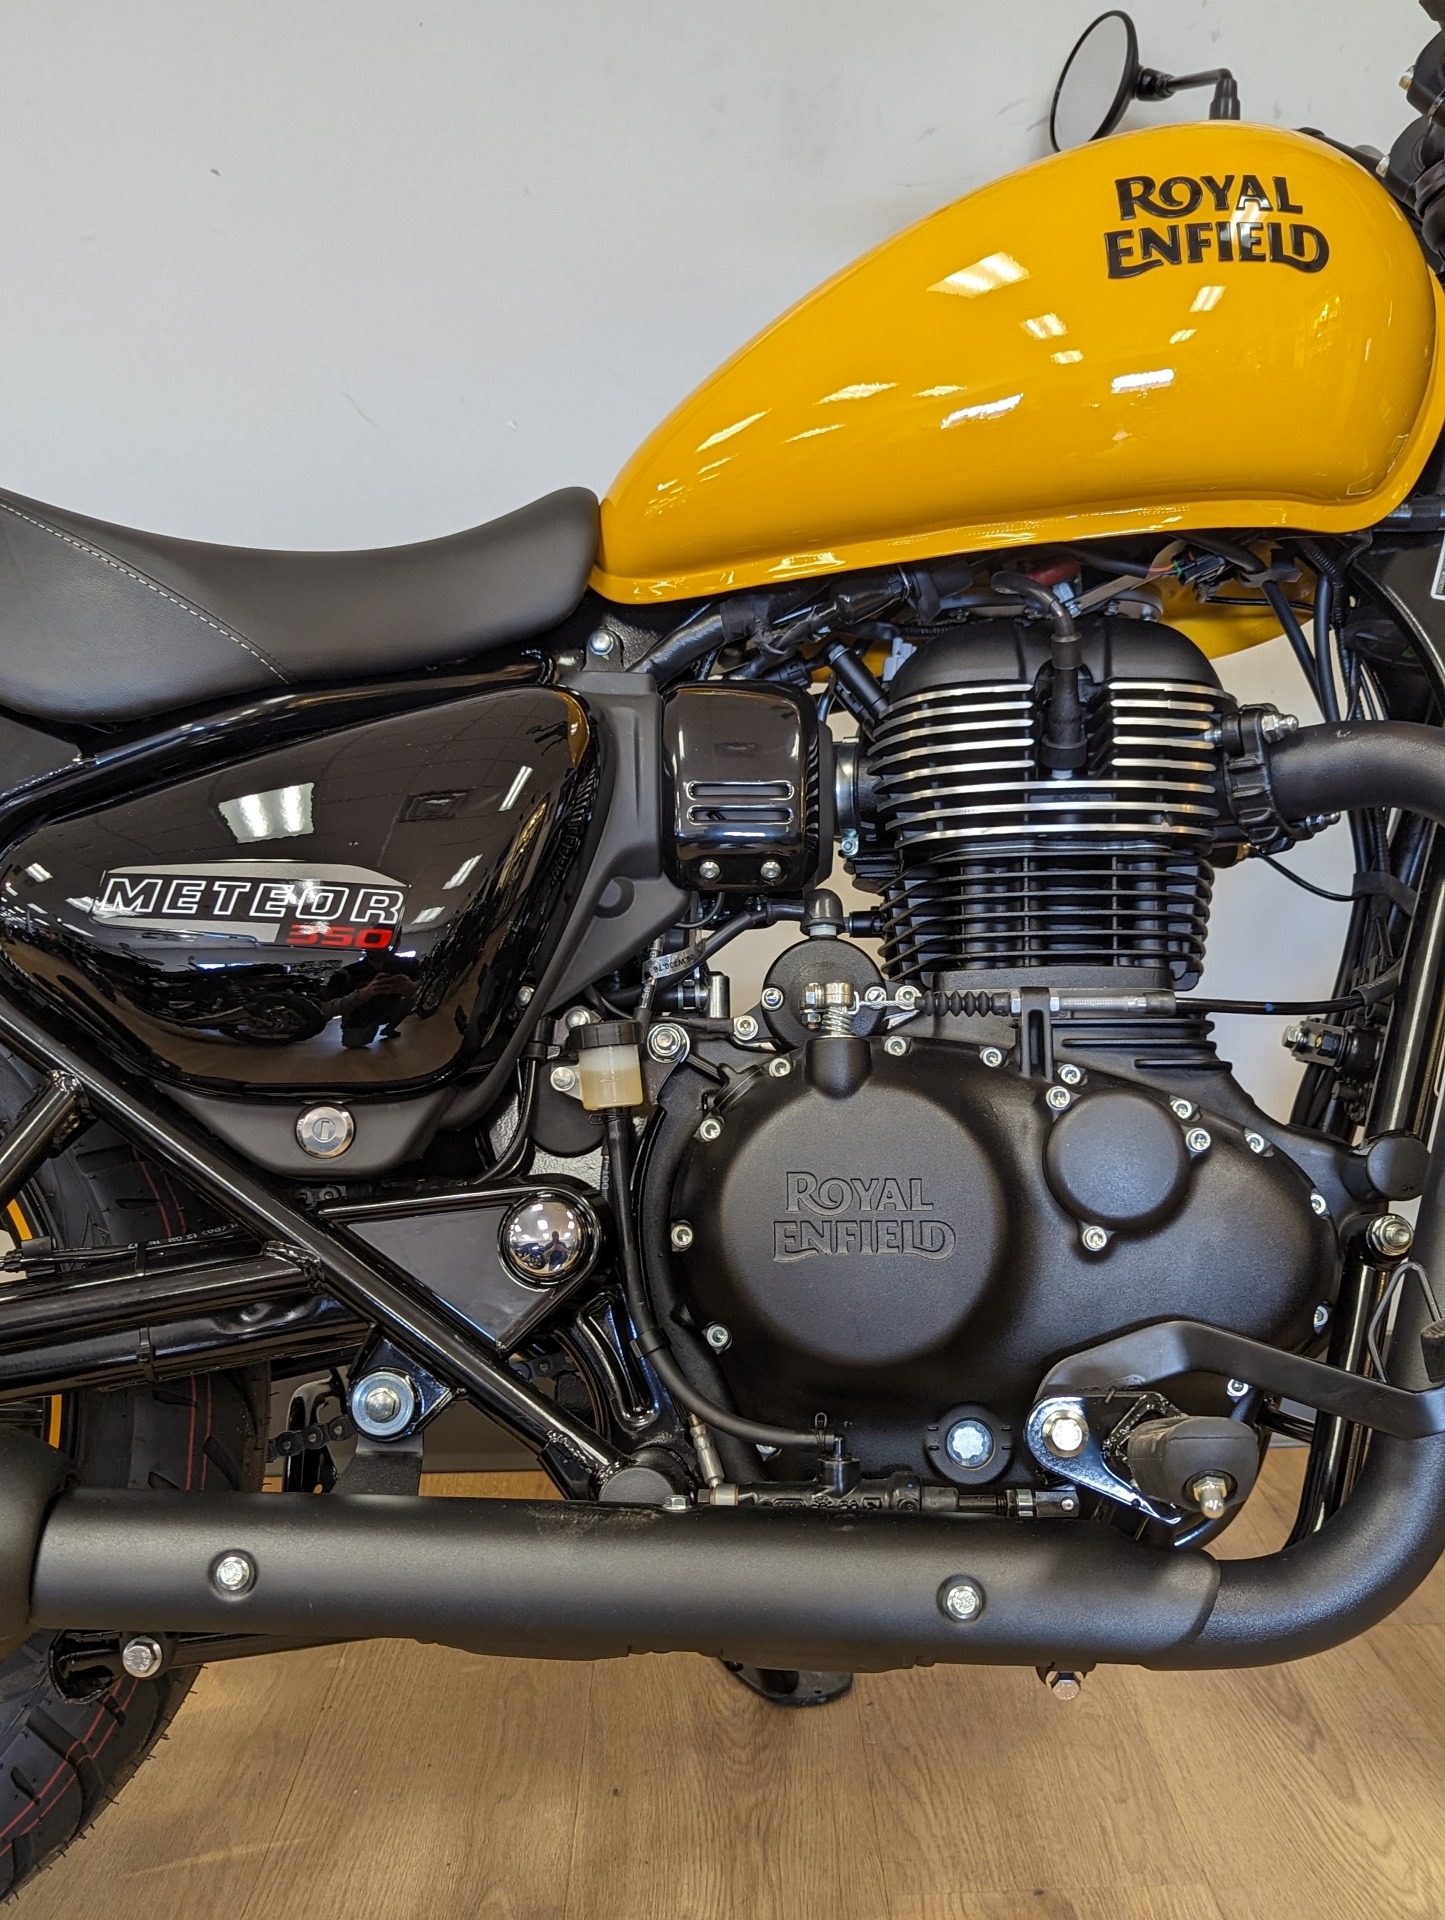 2023 Royal Enfield Meteor 350 in Mahwah, New Jersey - Photo 3